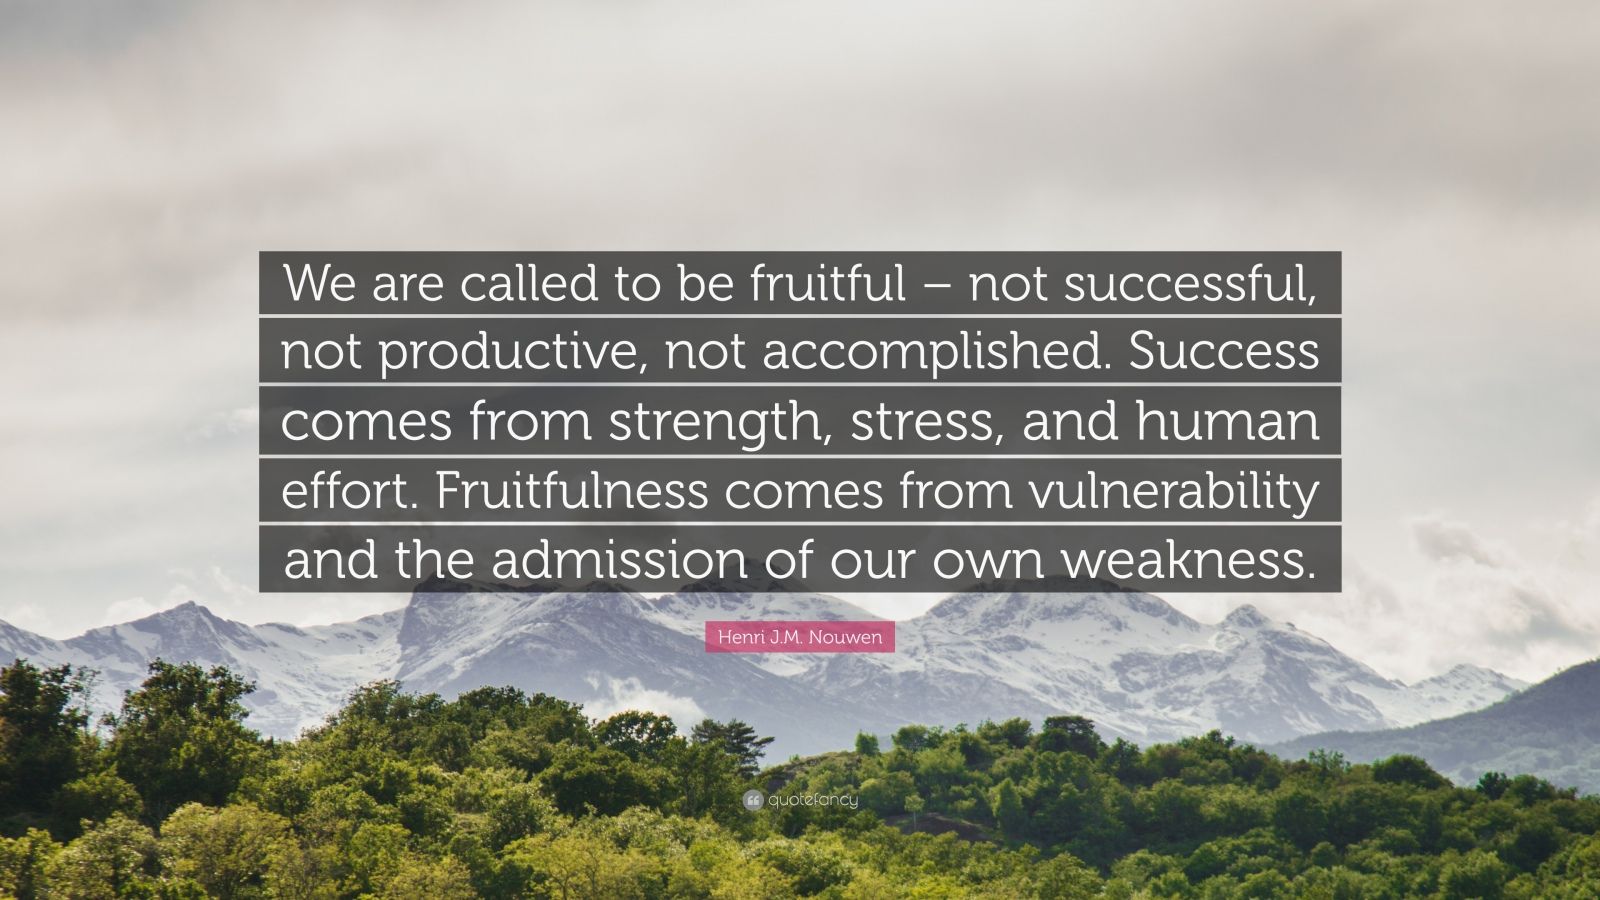 221491-Henri-J-M-Nouwen-Quote-We-are-cal